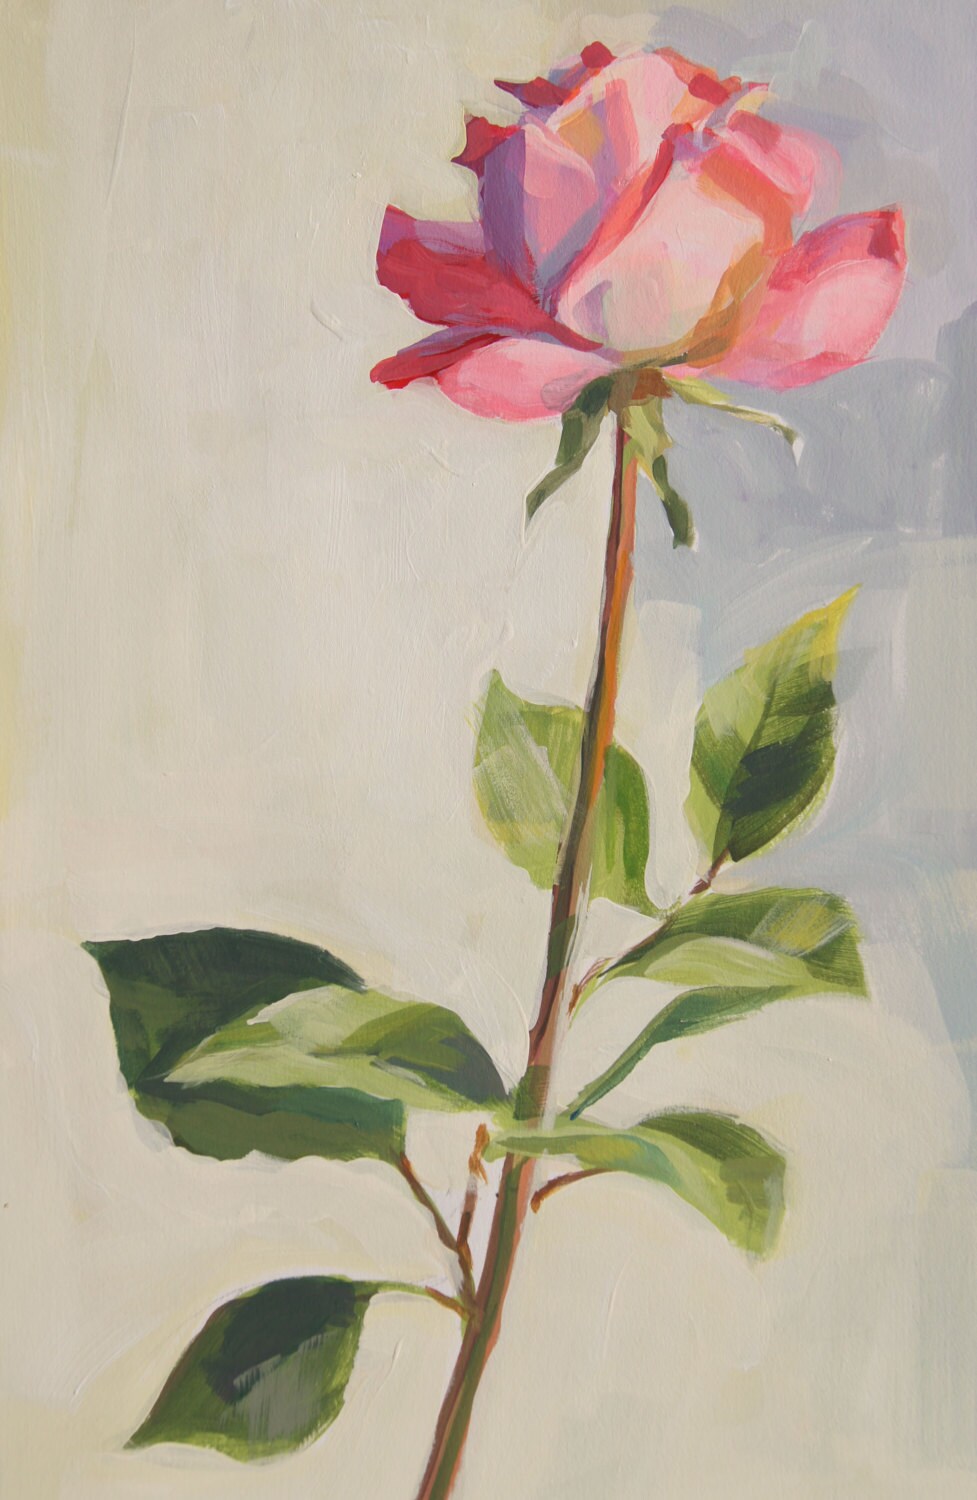 Reproduction of a Painting of a Single Long Stem Pink Rose on